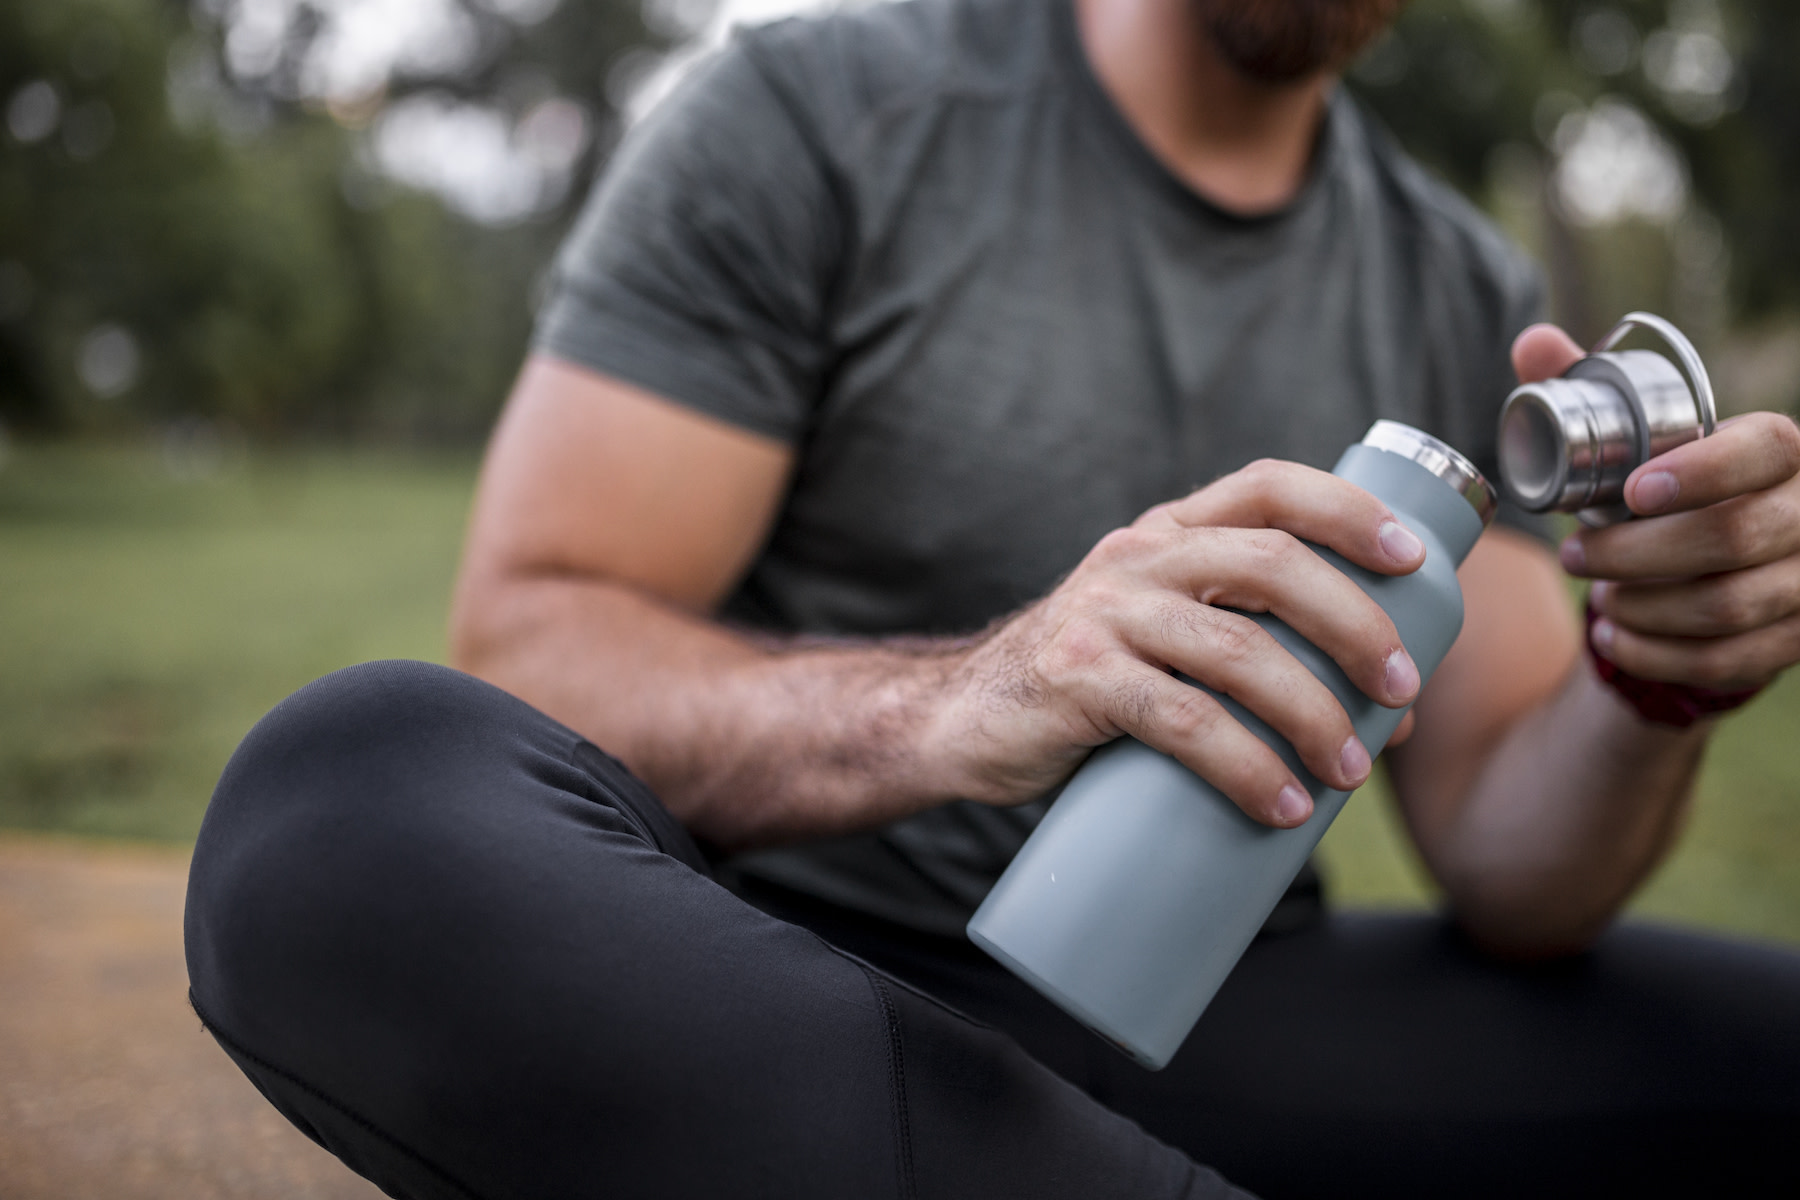 A close-up photo of a person closing a reusable water bottle while sitting down outside.